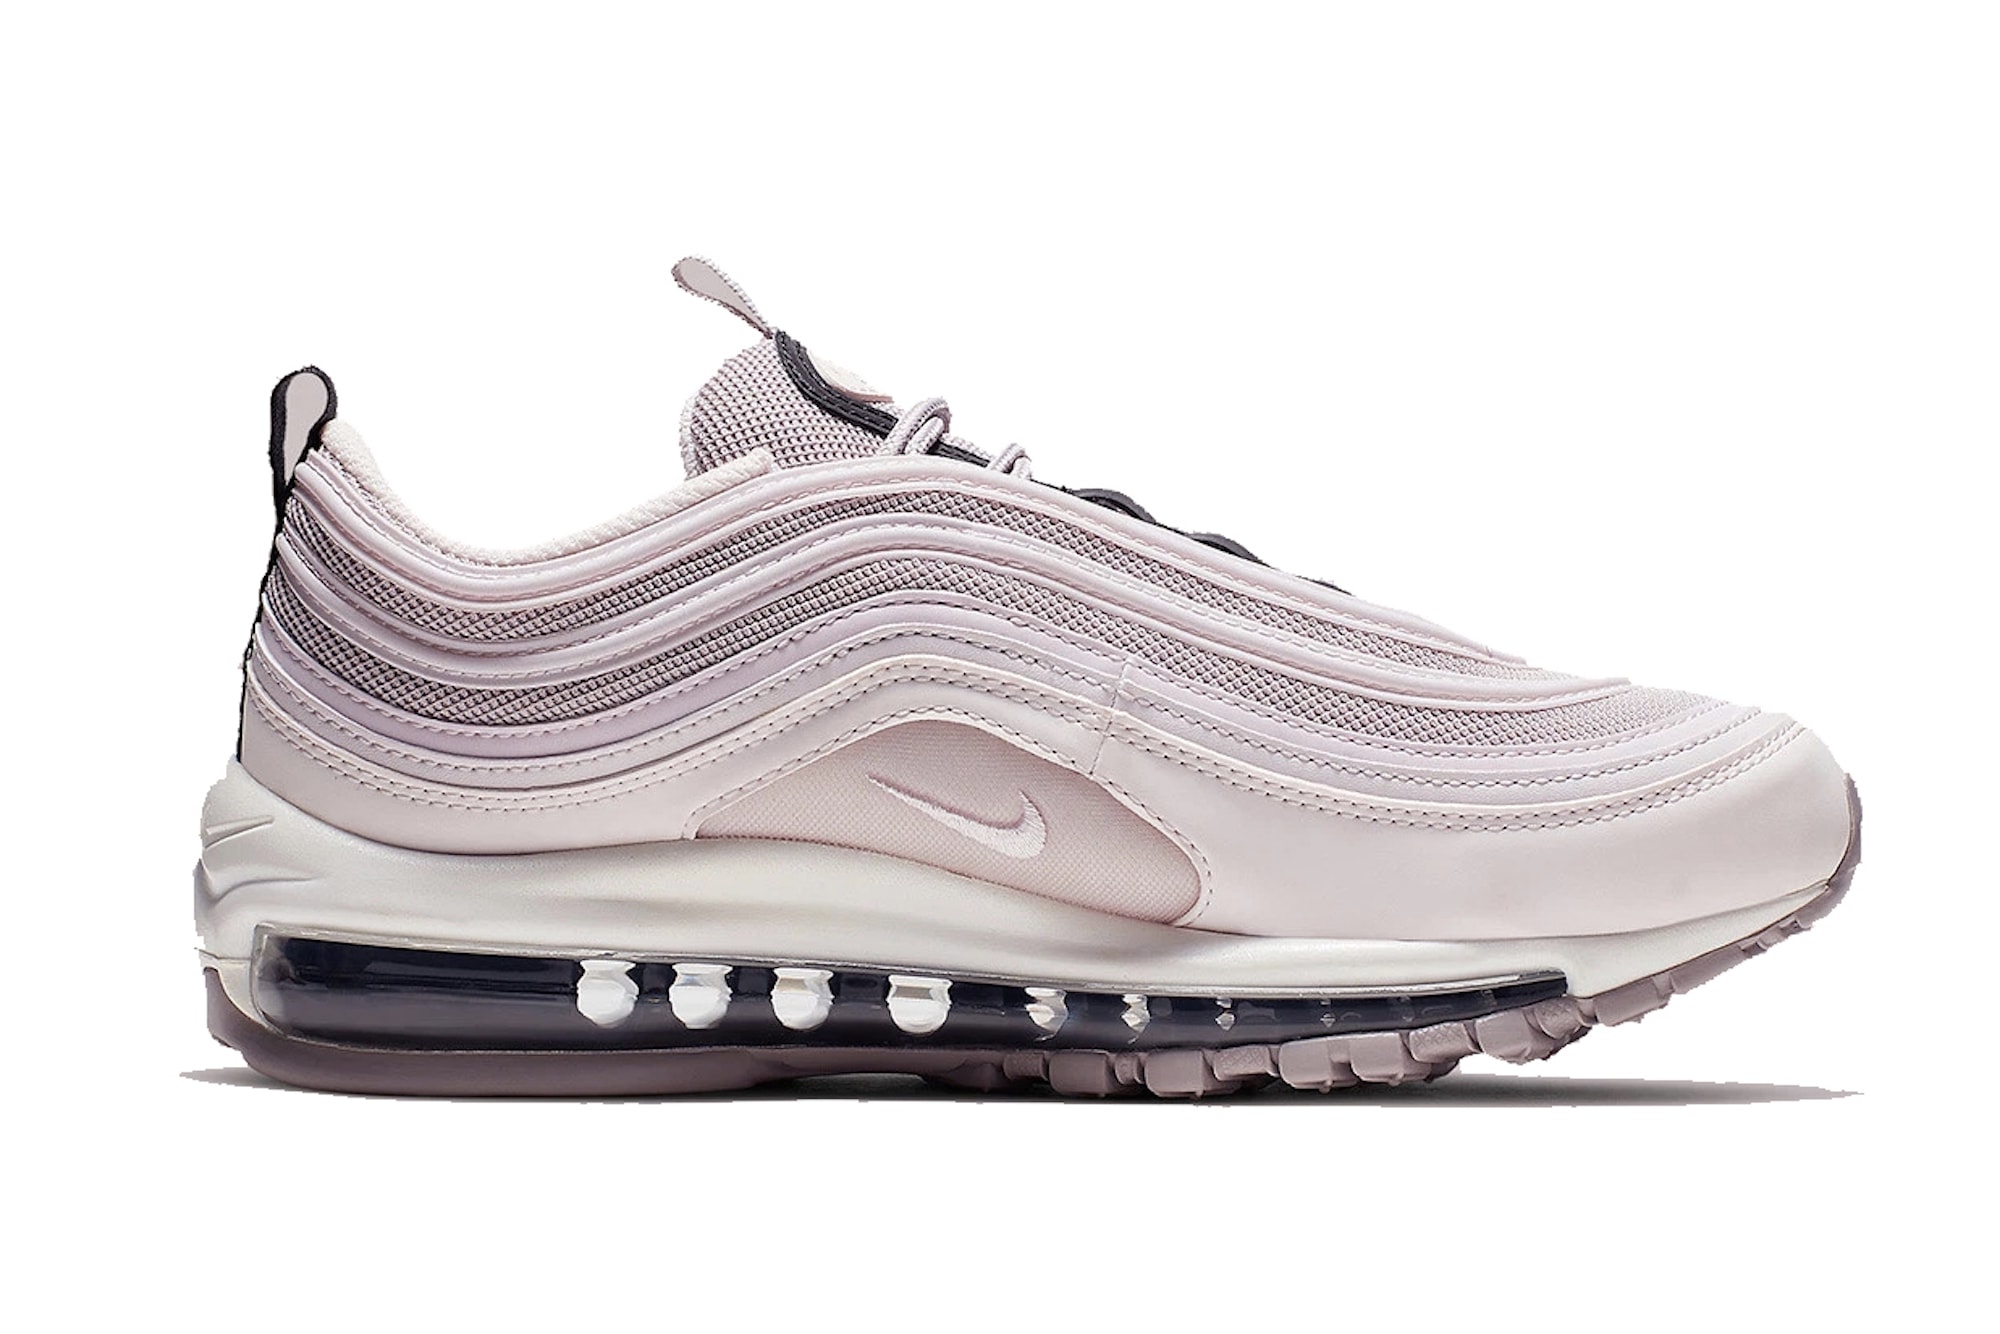 Nike Air Max 97 "Pastel Pink" Spring Release Monochrome Sneaker Shoe Retro Trainer 